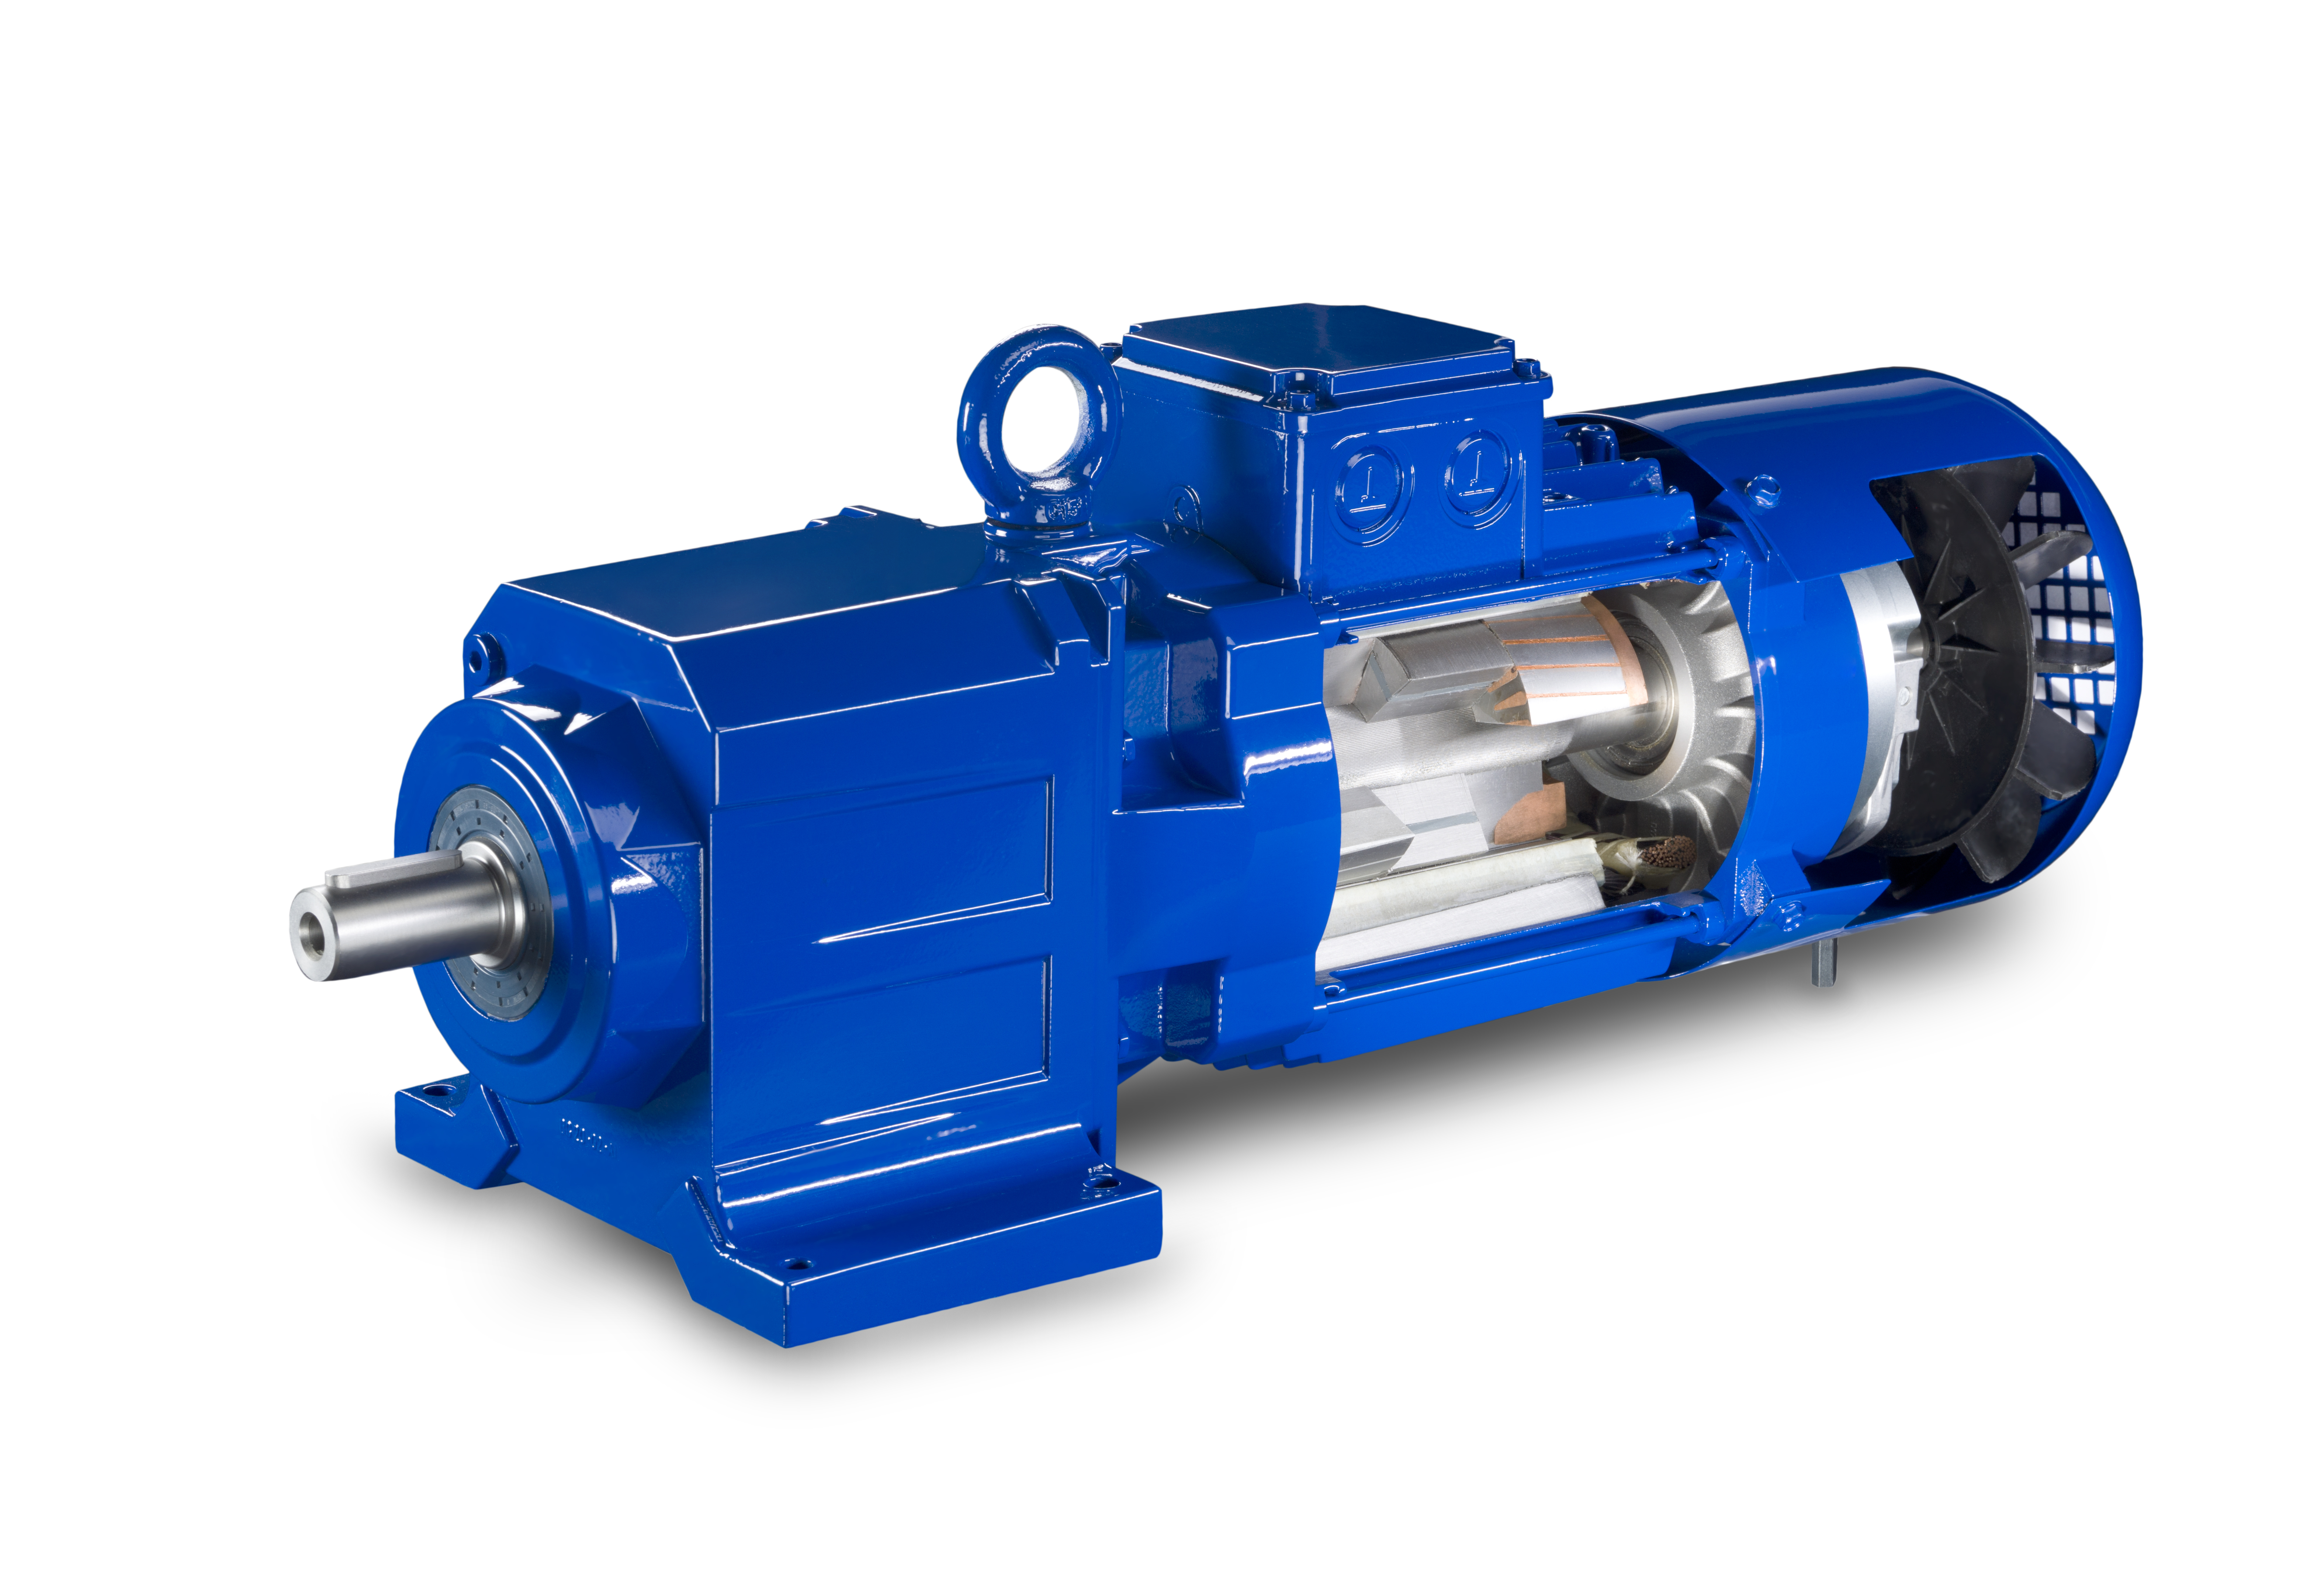 Bauer is a market-leader in geared motor technology, offering high efficiency and hygienic designs.